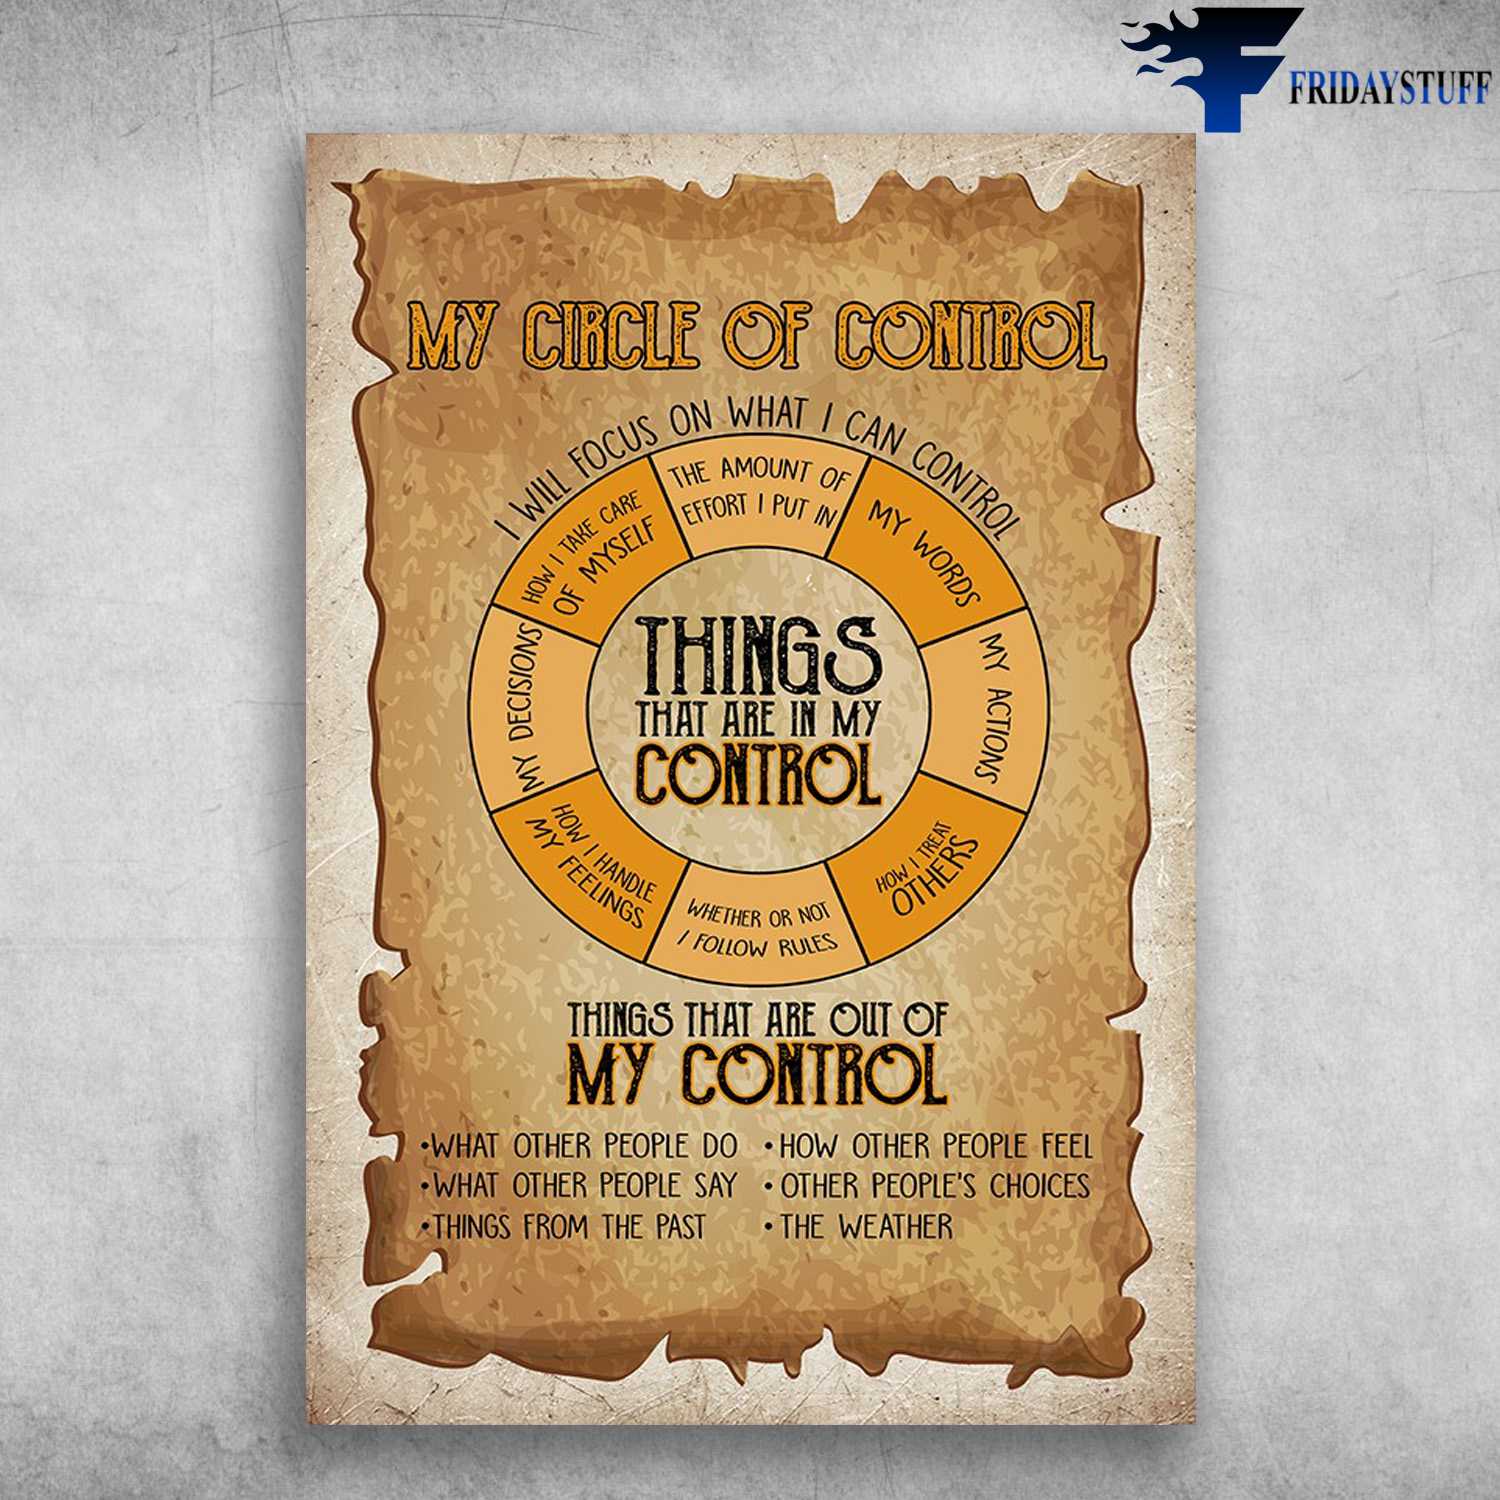 My Circle Of Control - I Will Focus On What I Can Control, Things That Are In My Control, Things That Are Out Of My Control